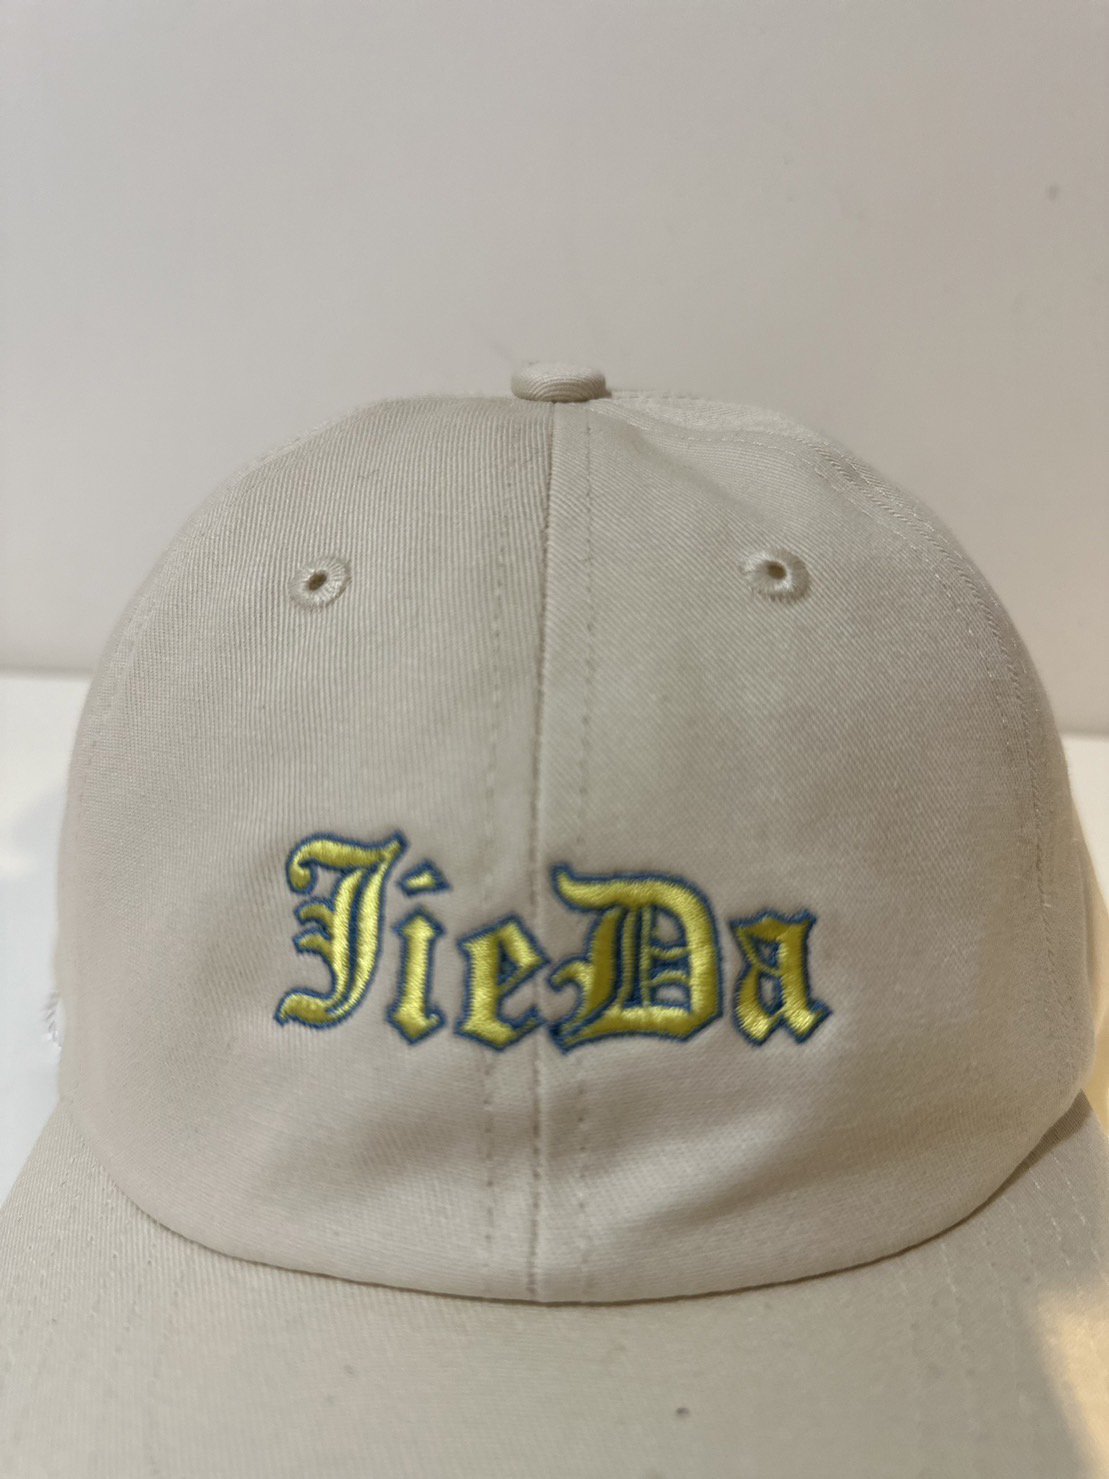 JieDa<br />LOGO CAP / IVORY <img class='new_mark_img2' src='https://img.shop-pro.jp/img/new/icons47.gif' style='border:none;display:inline;margin:0px;padding:0px;width:auto;' />